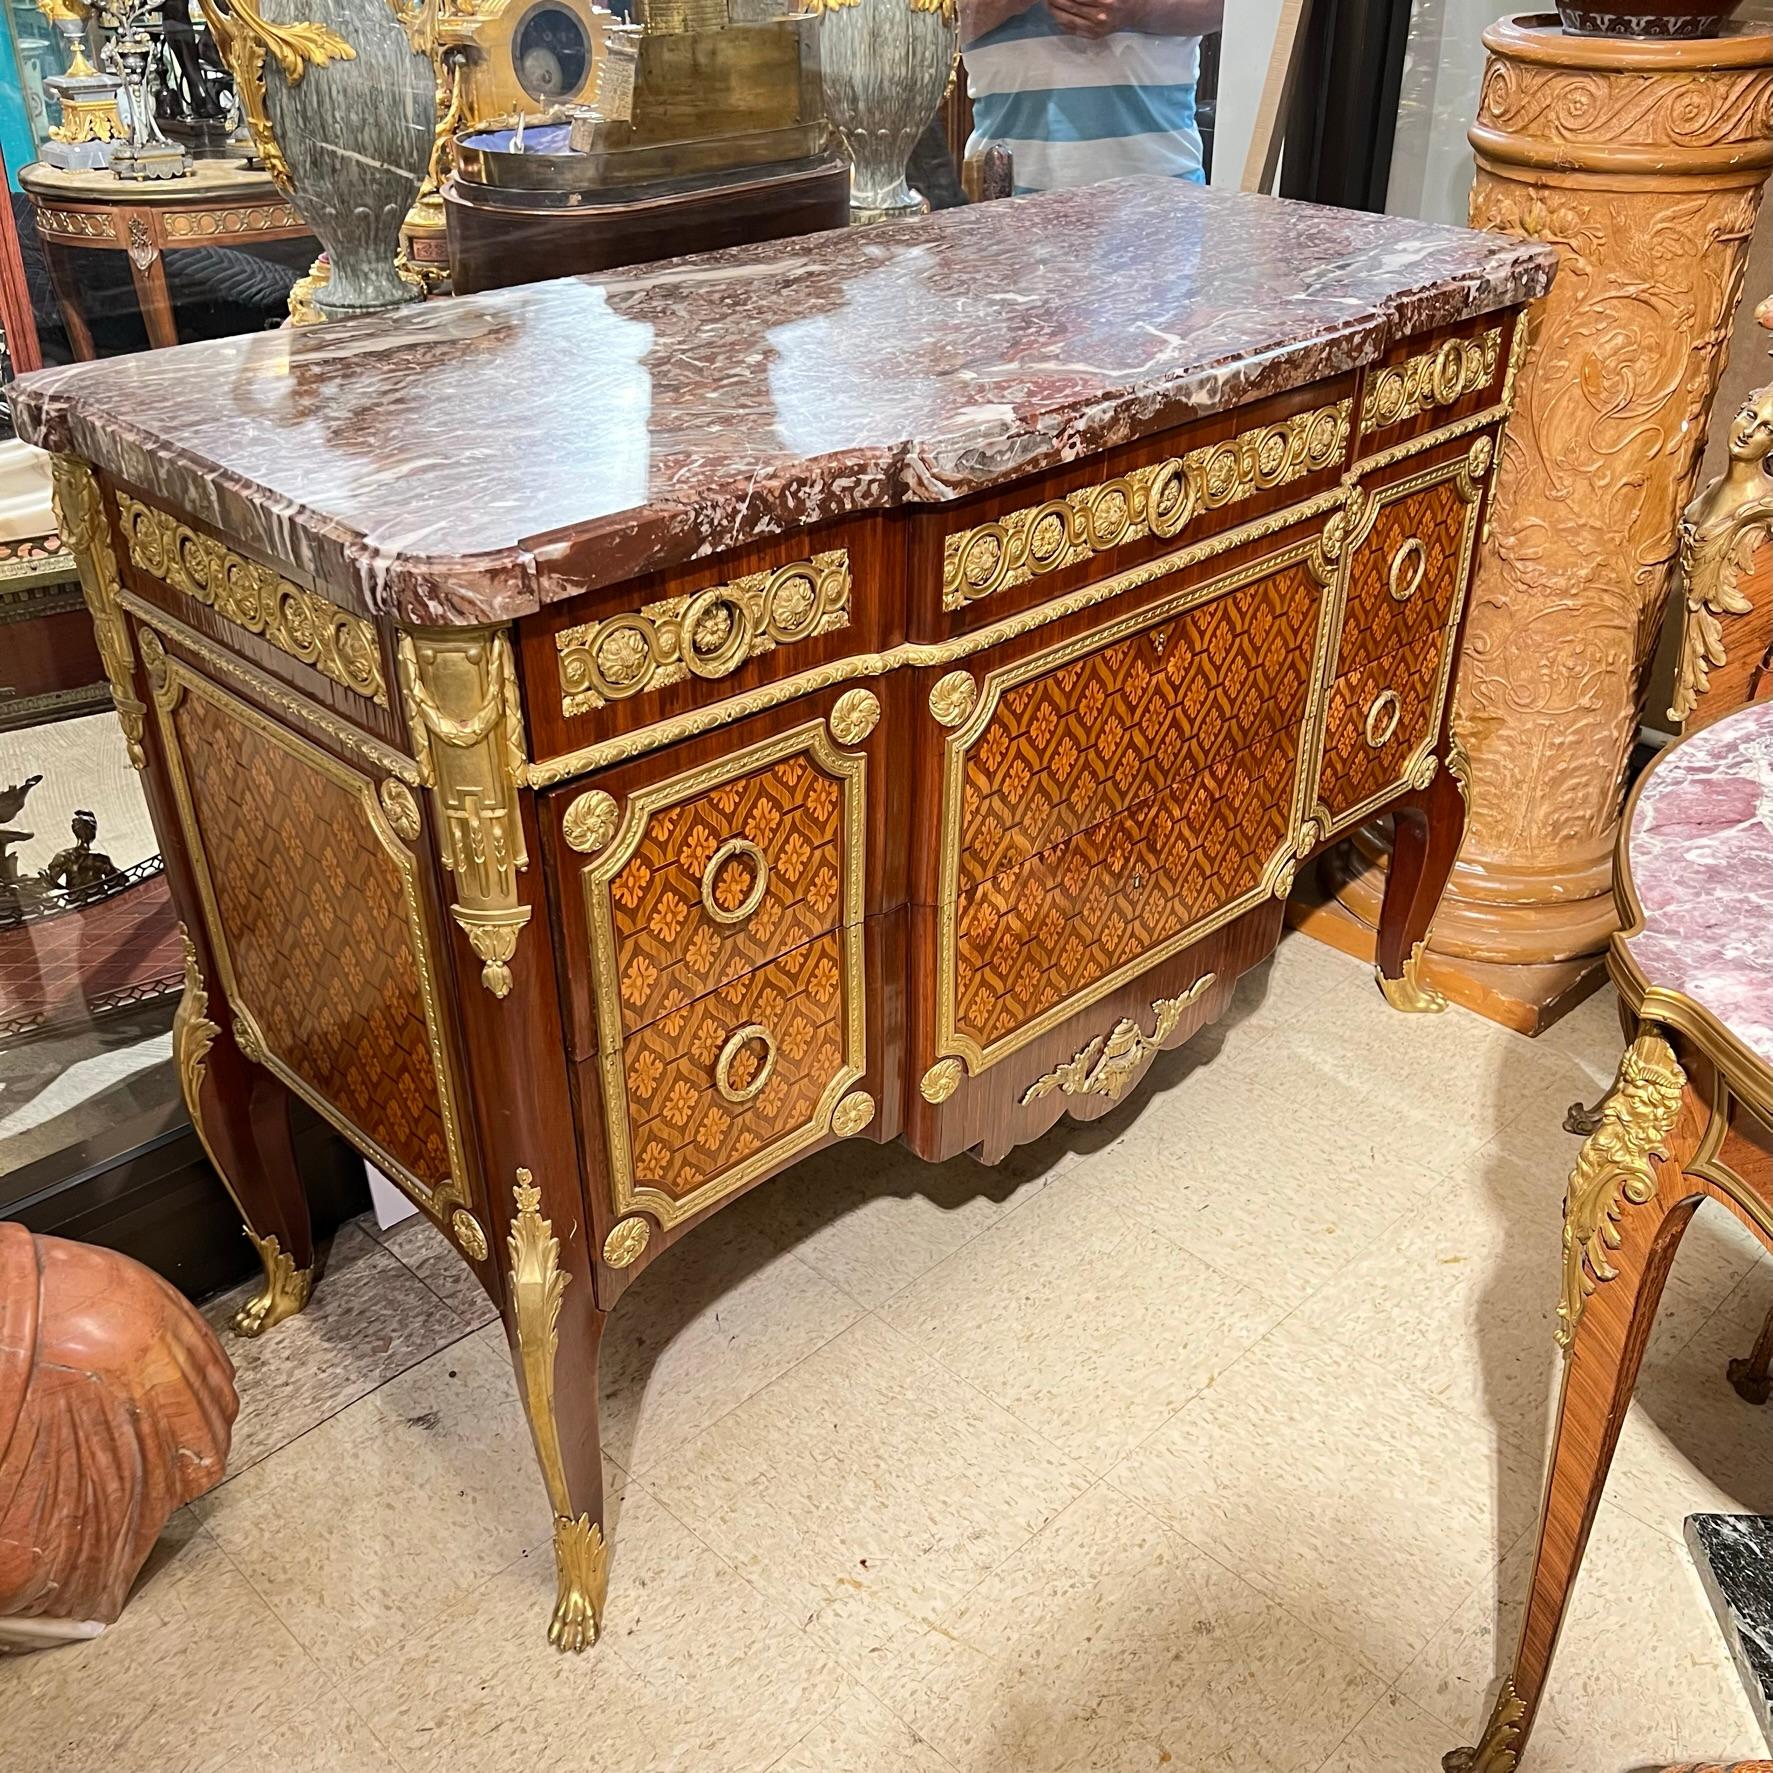 Antique (19th century) commode in the Louis XVI style exhibiting the finest craftsmanship, after the original model by Jean Henri Riesener,  including parquetry inlaid fruitwood veneer and ormolu bronze mounts of exceptional quality.  Made in Paris